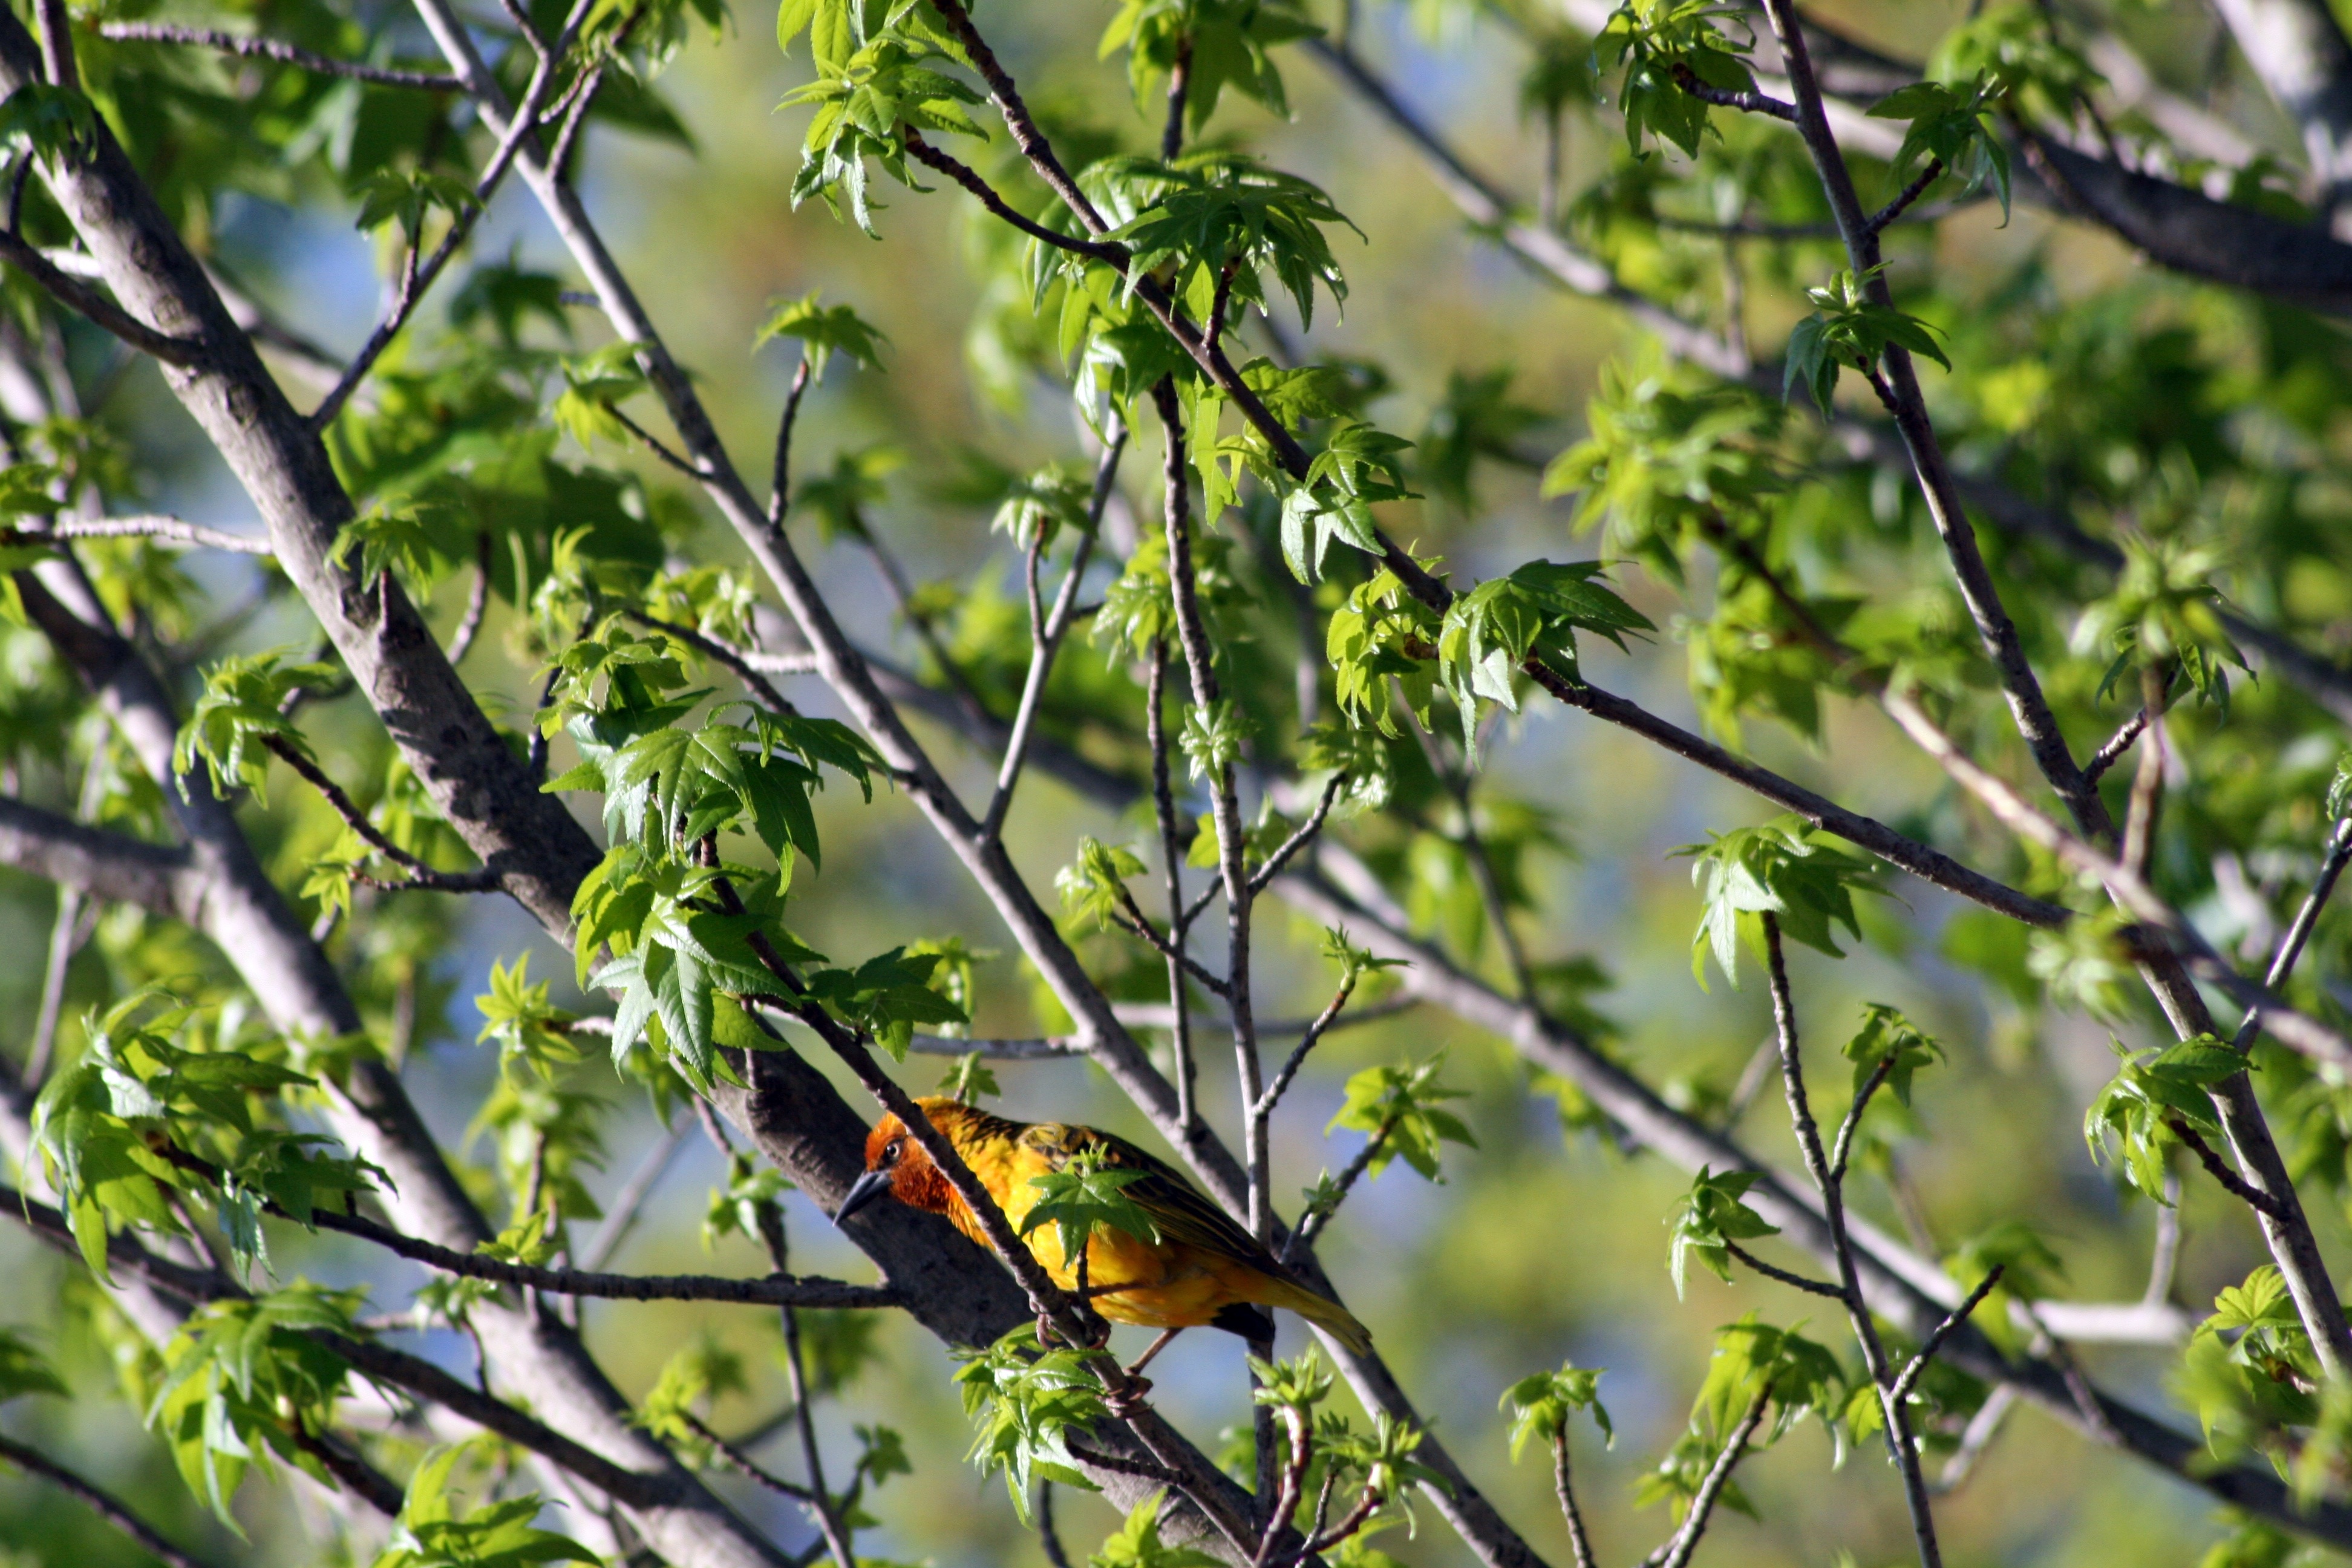 red and yellow bird